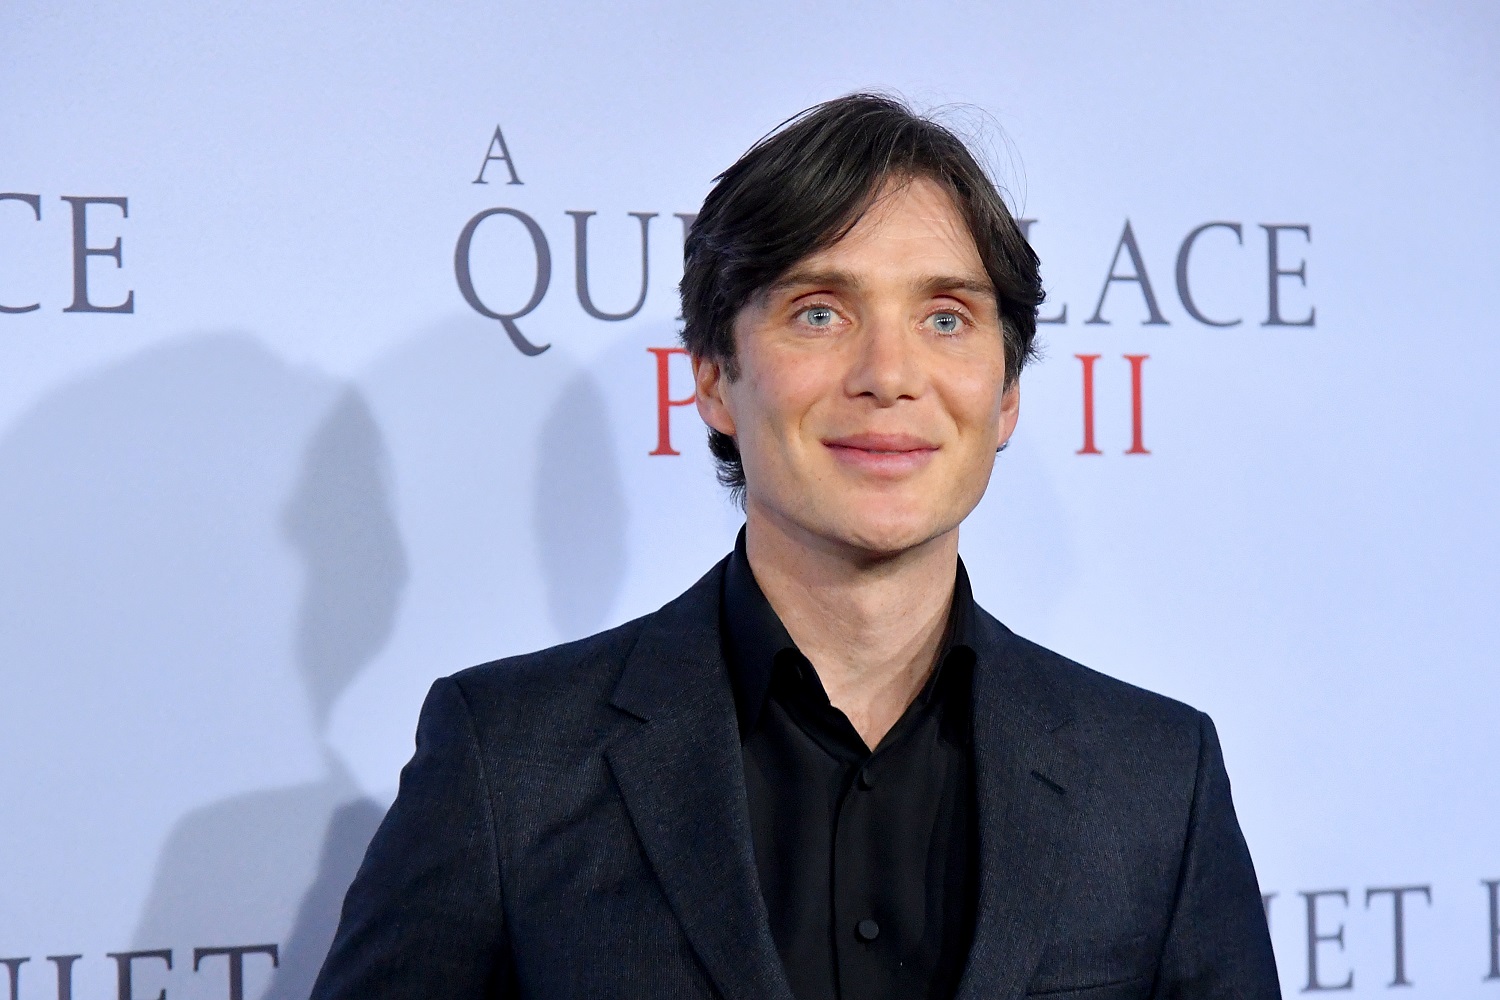 Actor Cillian Murphy poses for photographers at the premiere of 'A Quiet Place Part II.'